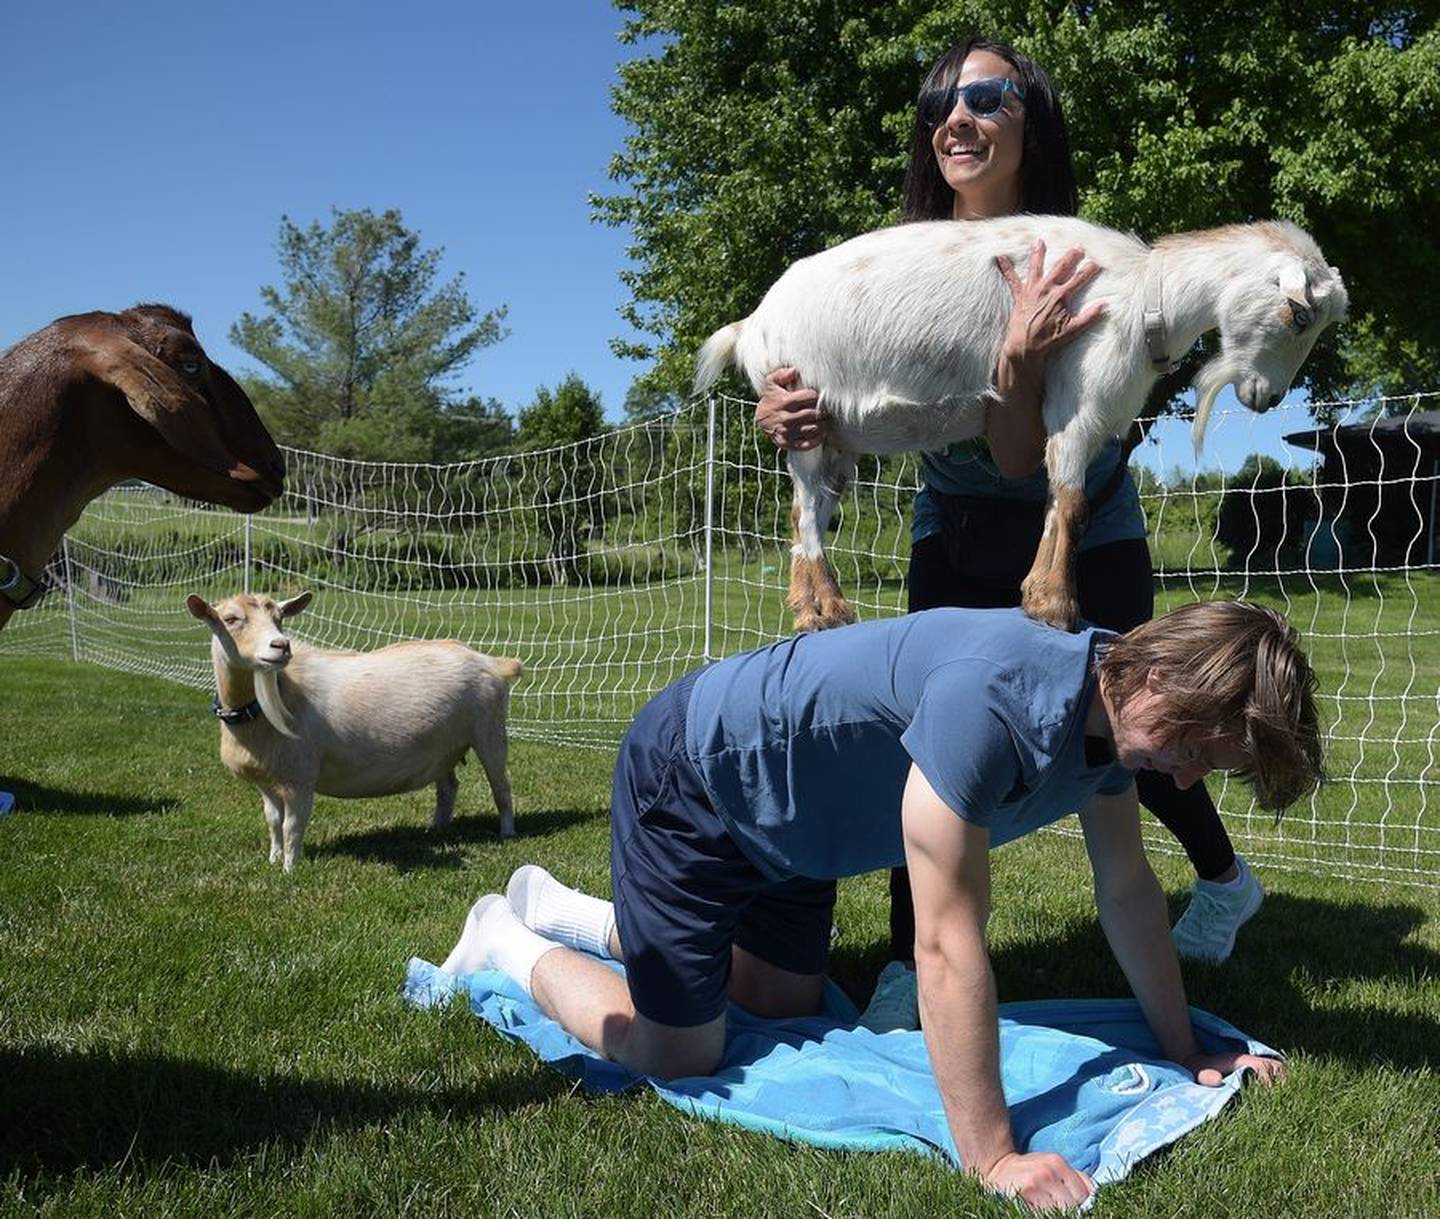 Danielle Kerr removes Rose from Mitch Dec's back when she thinks the 20-year-old from Cary has had enough during a Goat Yoga Chicago class in Elgin.